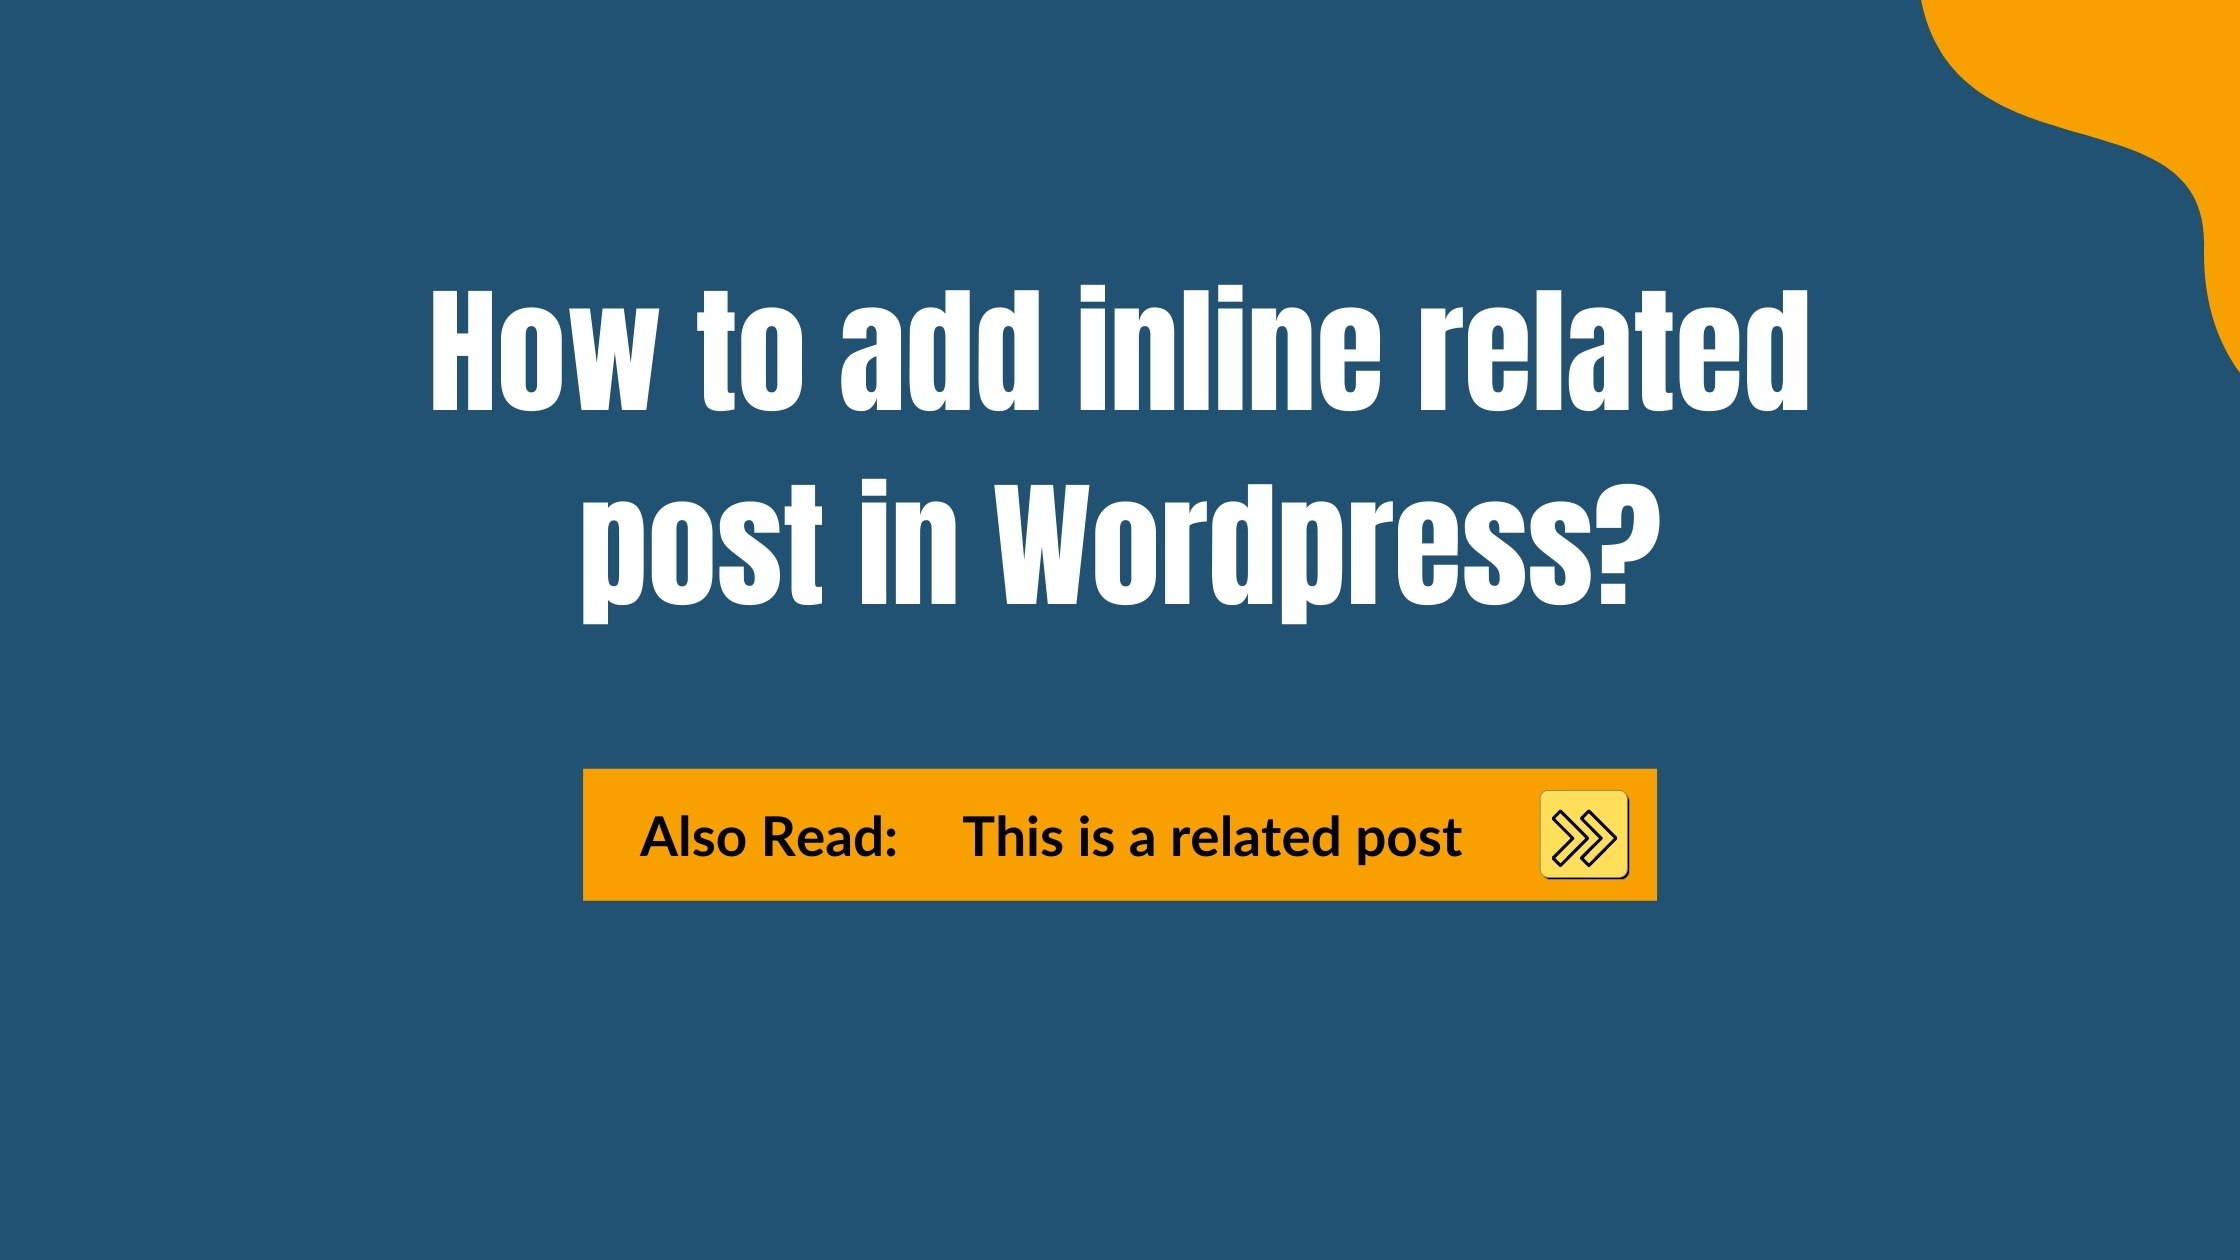 How to add inline related post in WordPress?